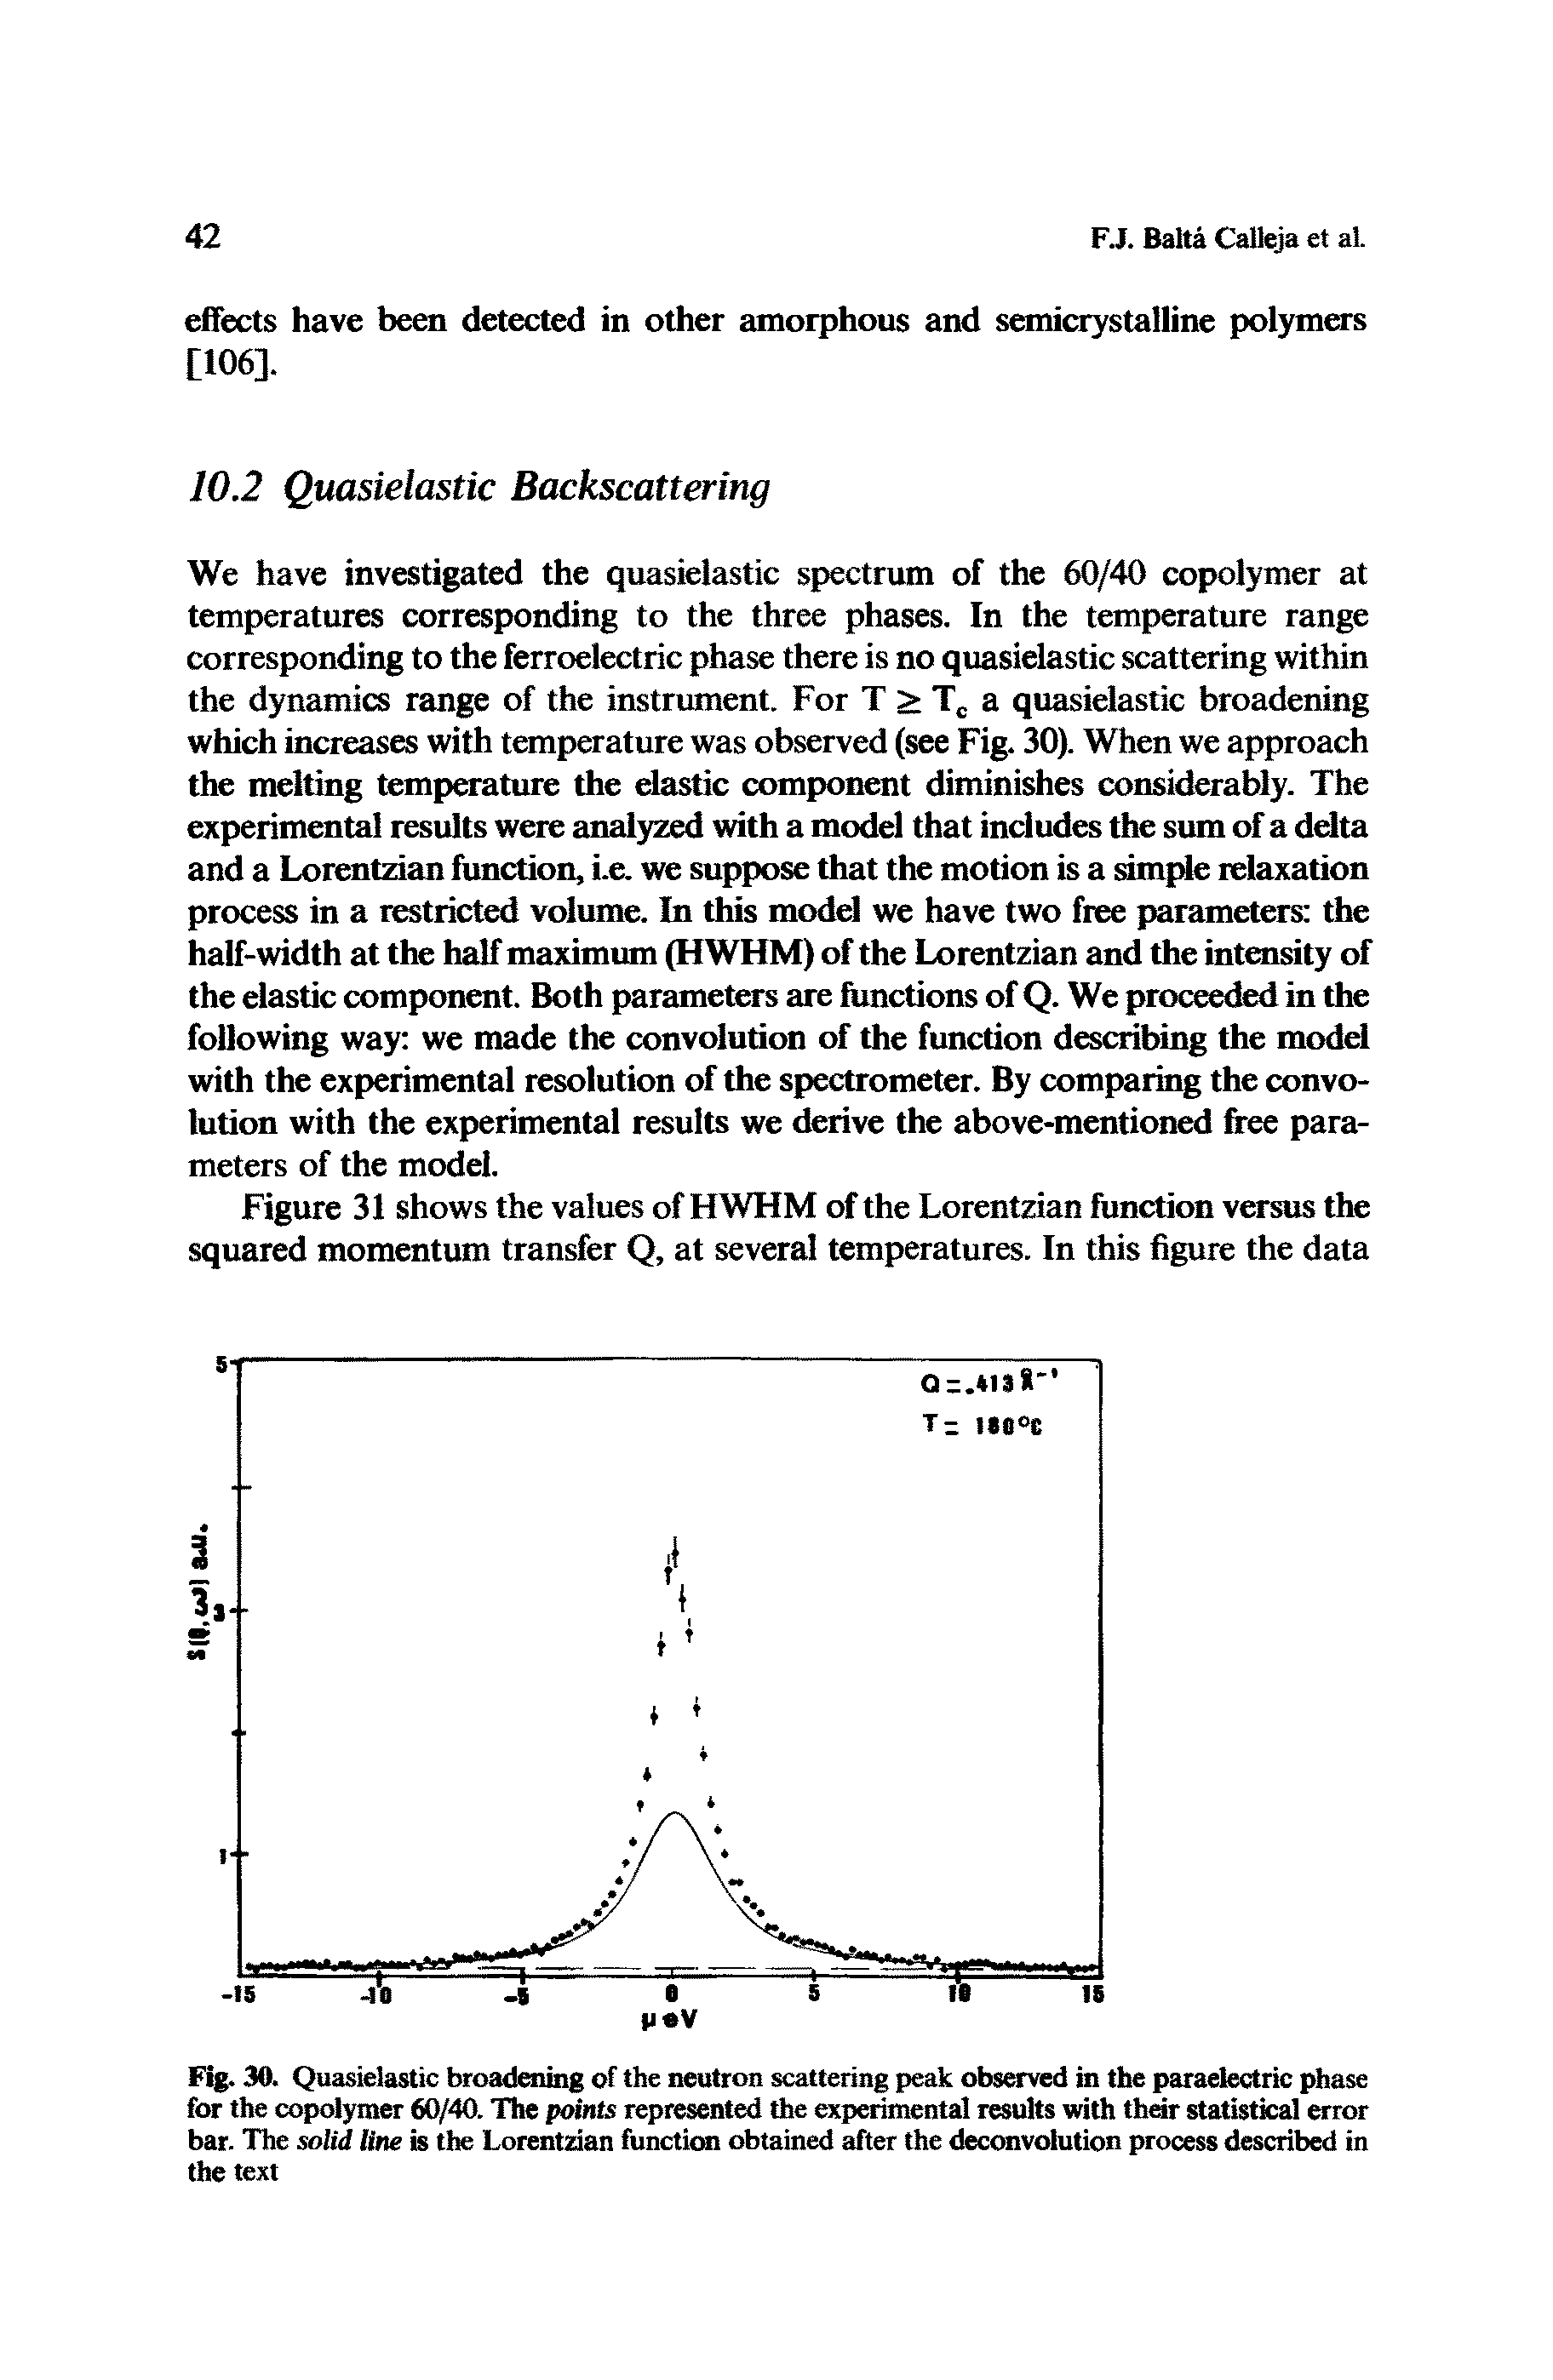 Fig. 30. Quasielastic broadening of the neutron scattering peak observed in the paraelectric phase for the copolymer 60/40. The points represented the experimental results with their statistical error bar. The solid line is the Lorentzian function obtained after the deconvolution process described in the text...